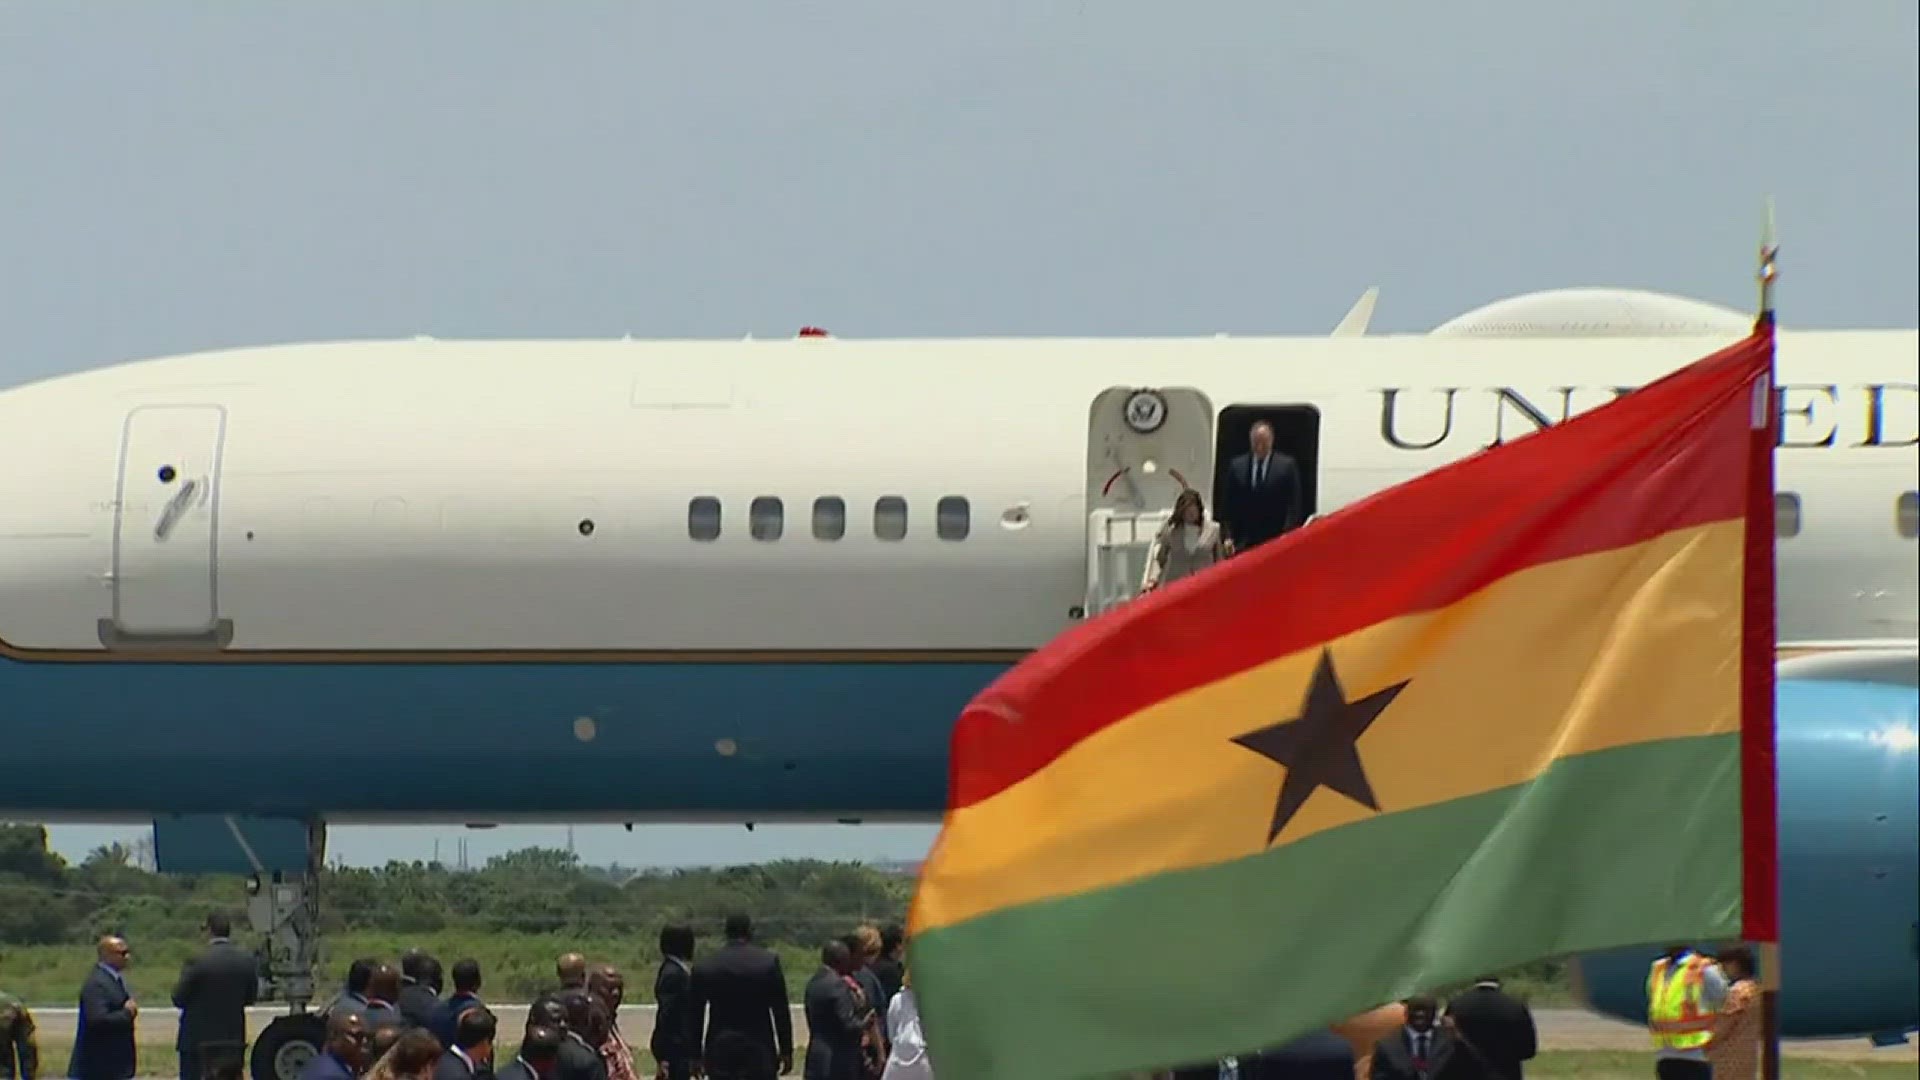 Ghana's vice president greeted her as dancers and drummers performed in the background.